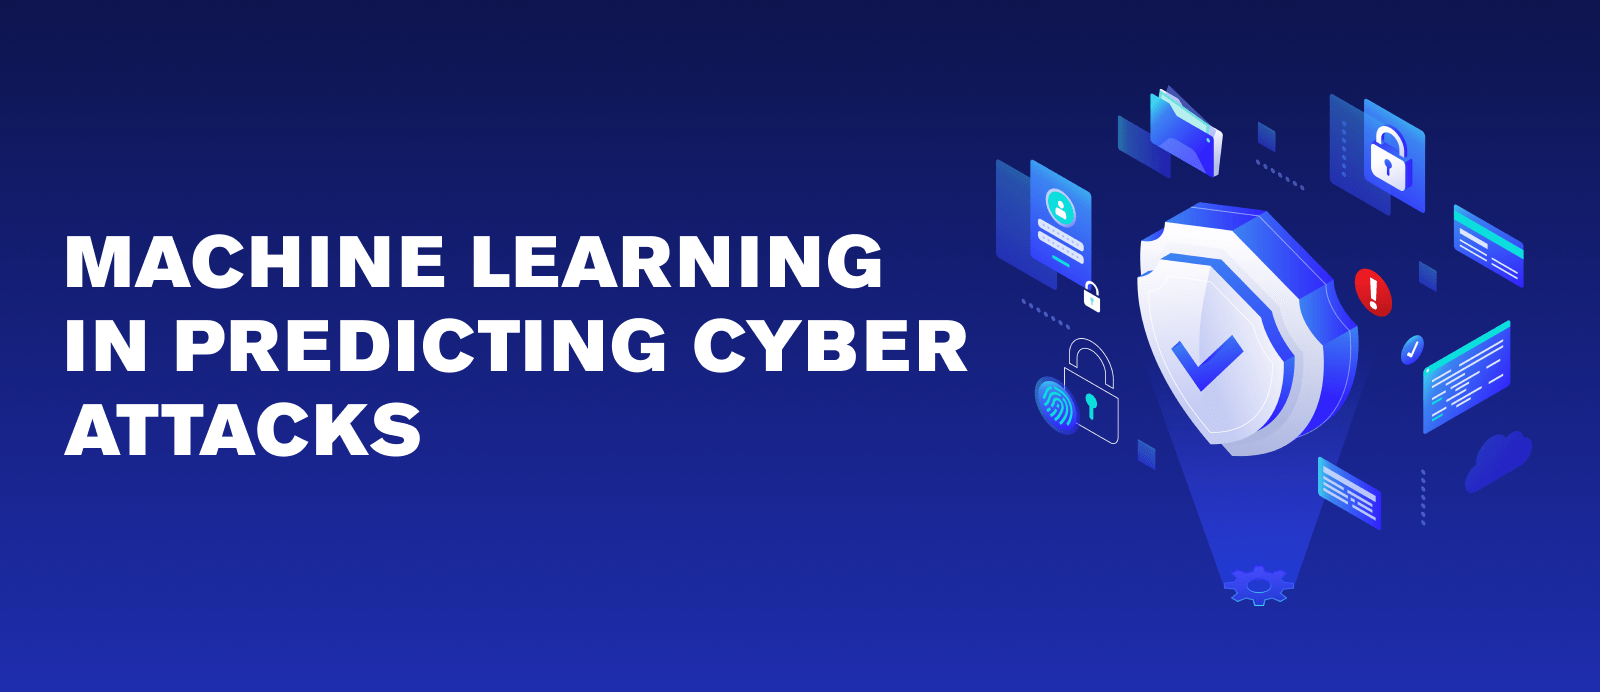 Machine Learning in Predicting Cyber Attacks